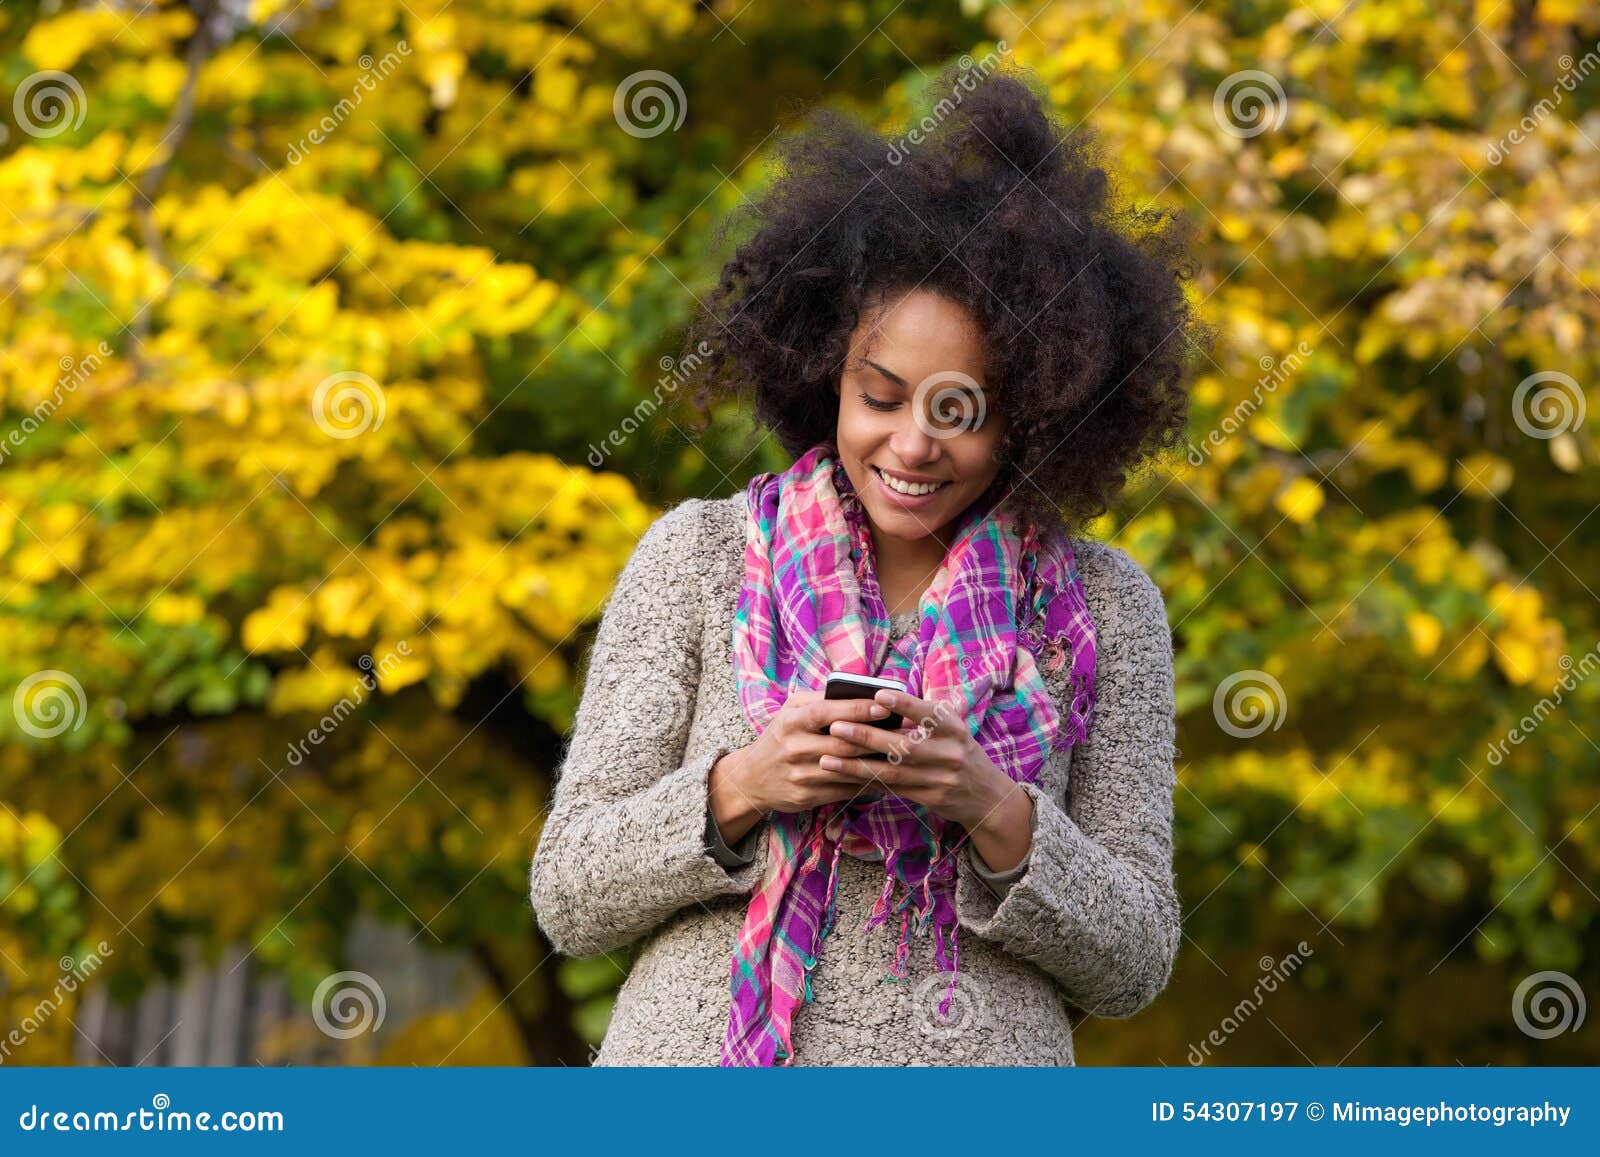 happy young woman reading text message on mobile phone